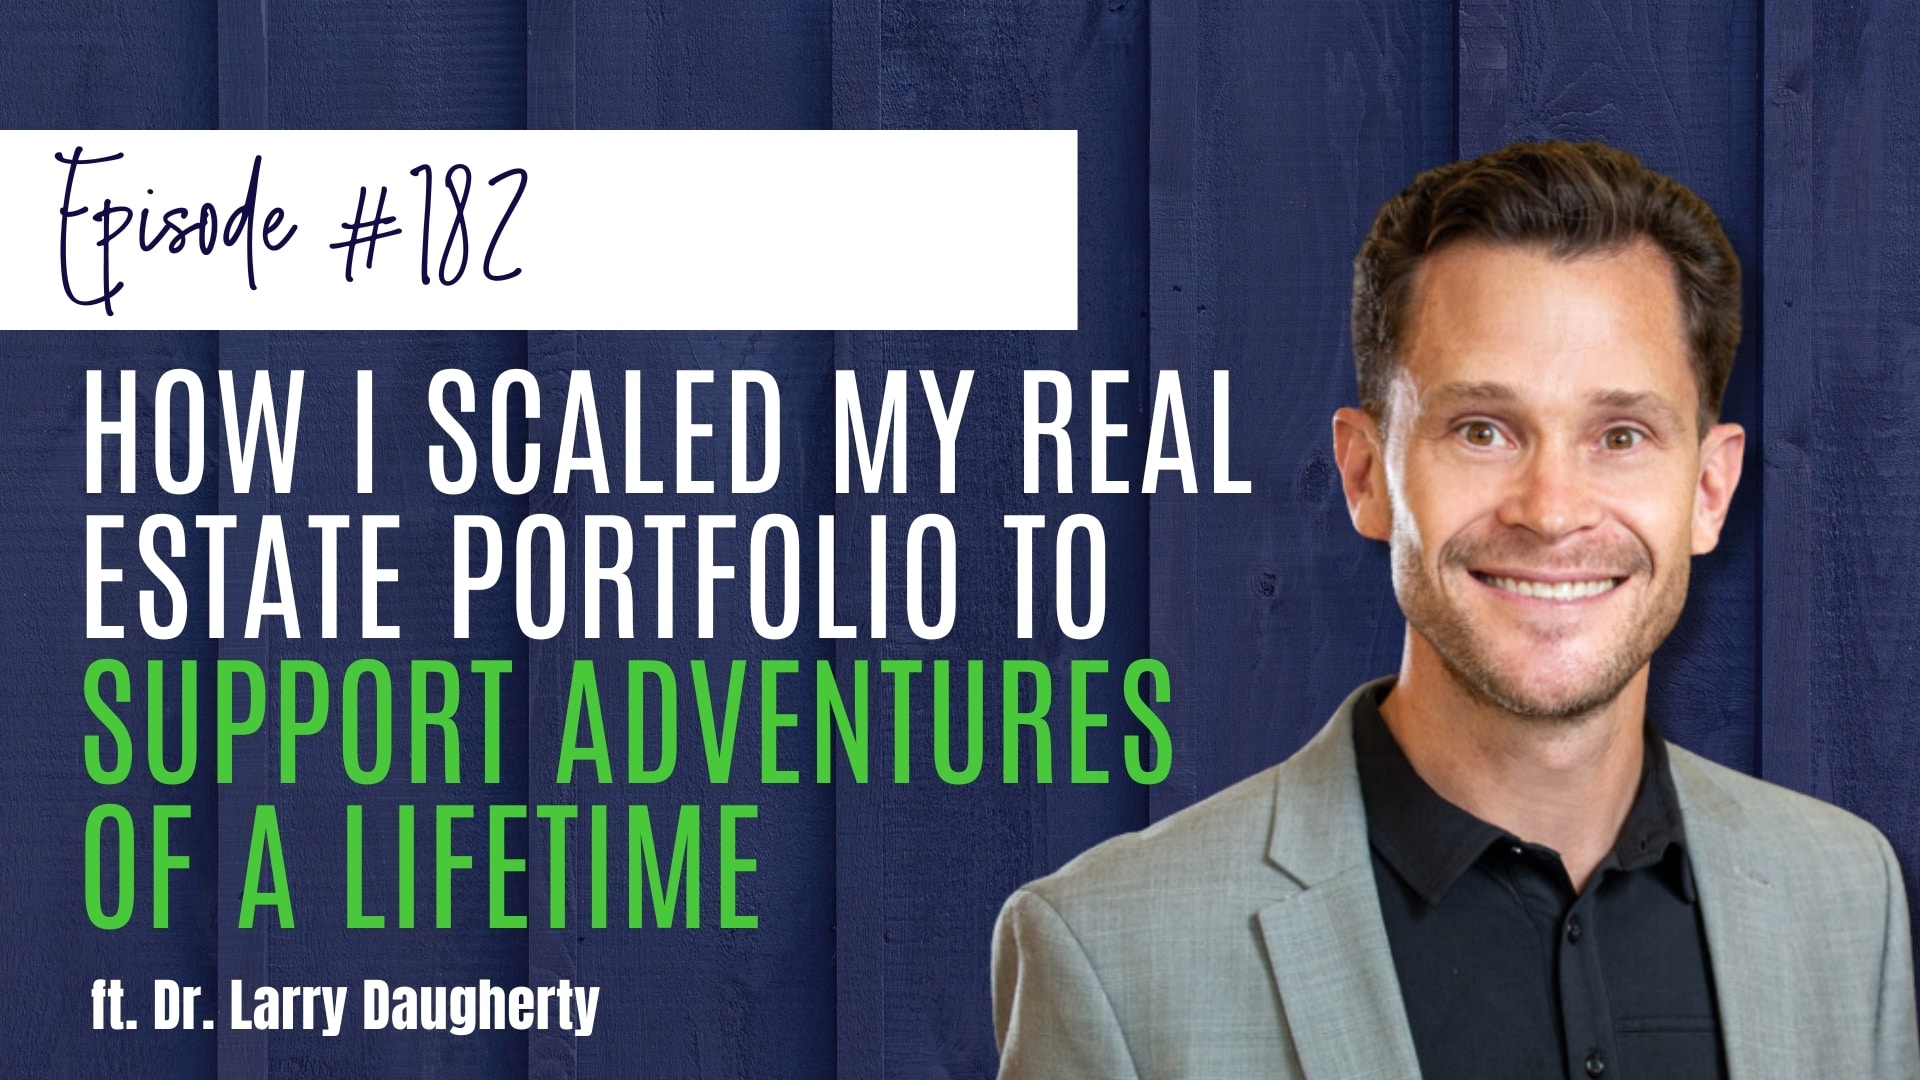 #182 How I Scaled My Real Estate Portfolio to Support Adventures of a Lifetime ft. Dr. Larry Daugherty